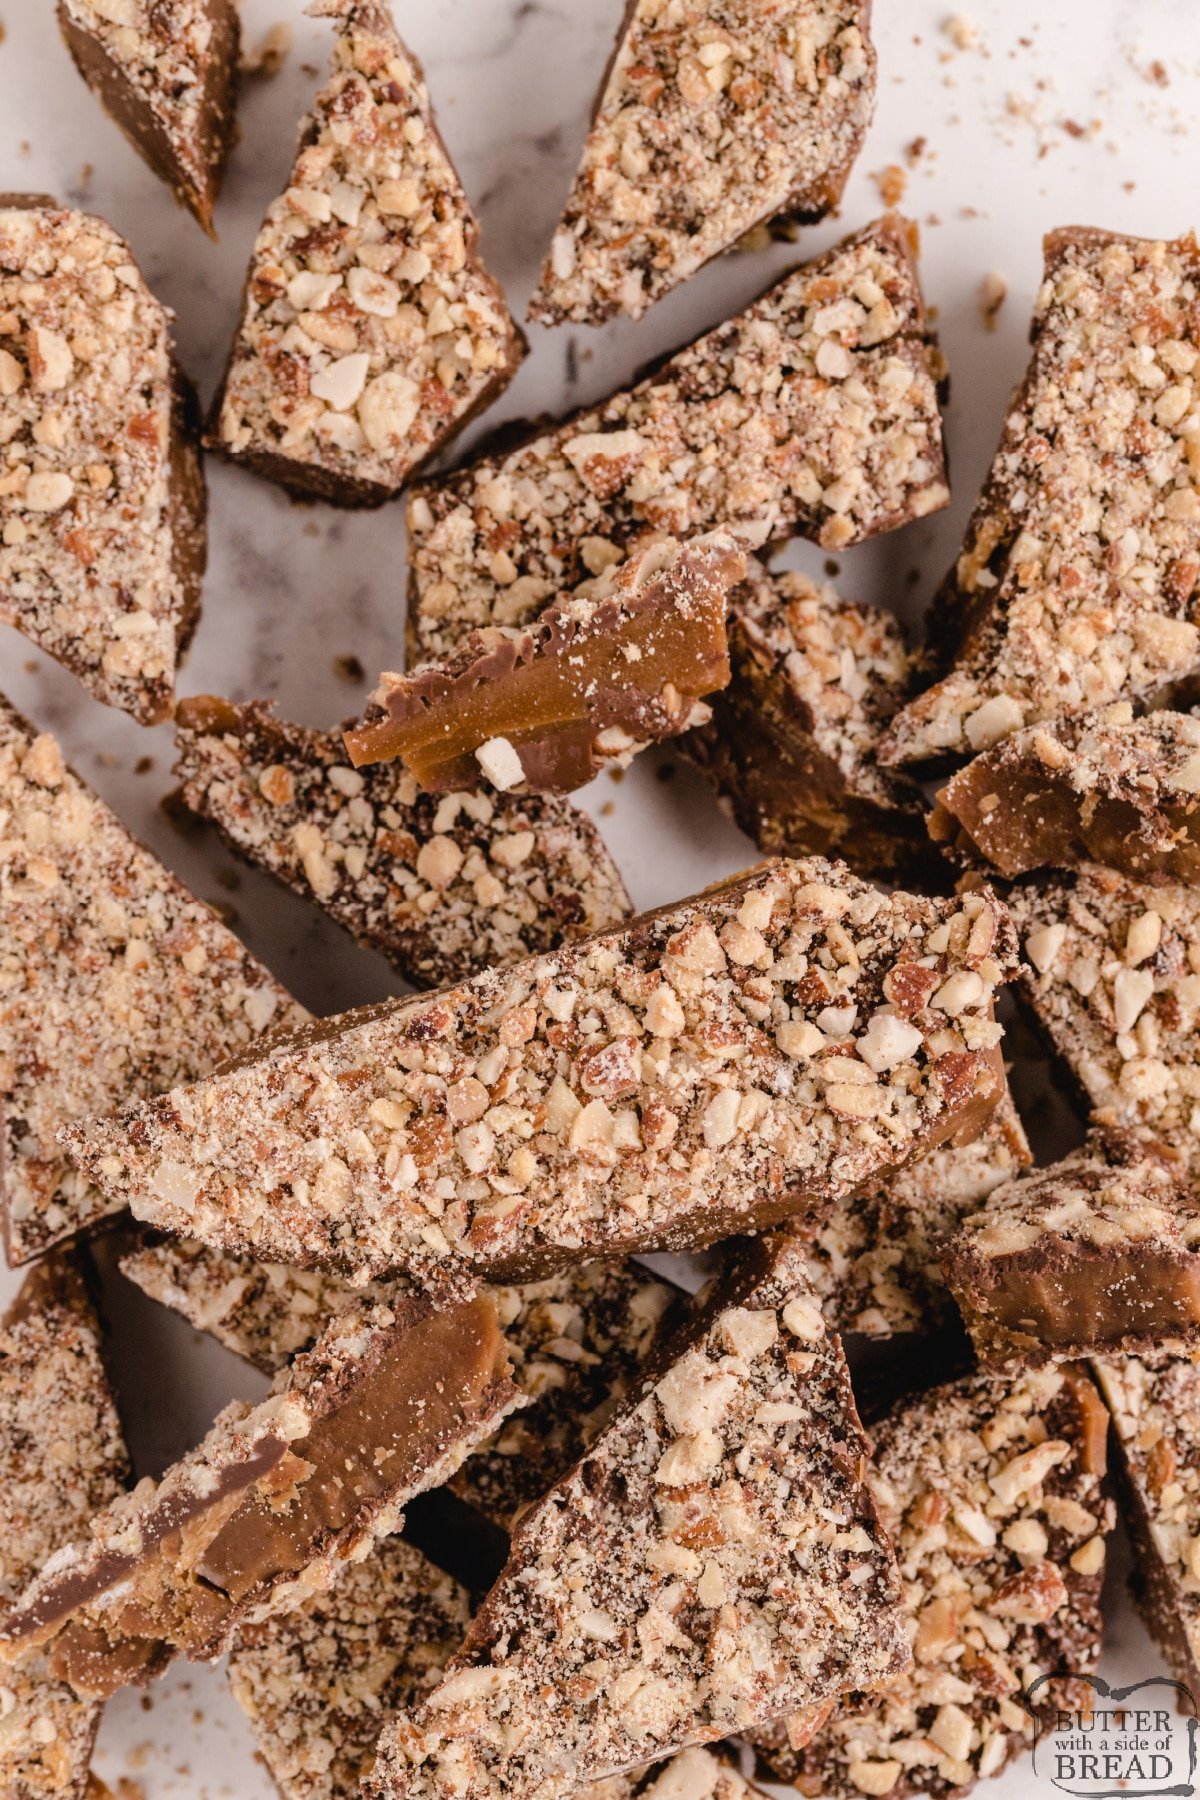 Easy English toffee recipe made with chocolate, almonds, butter and sugar